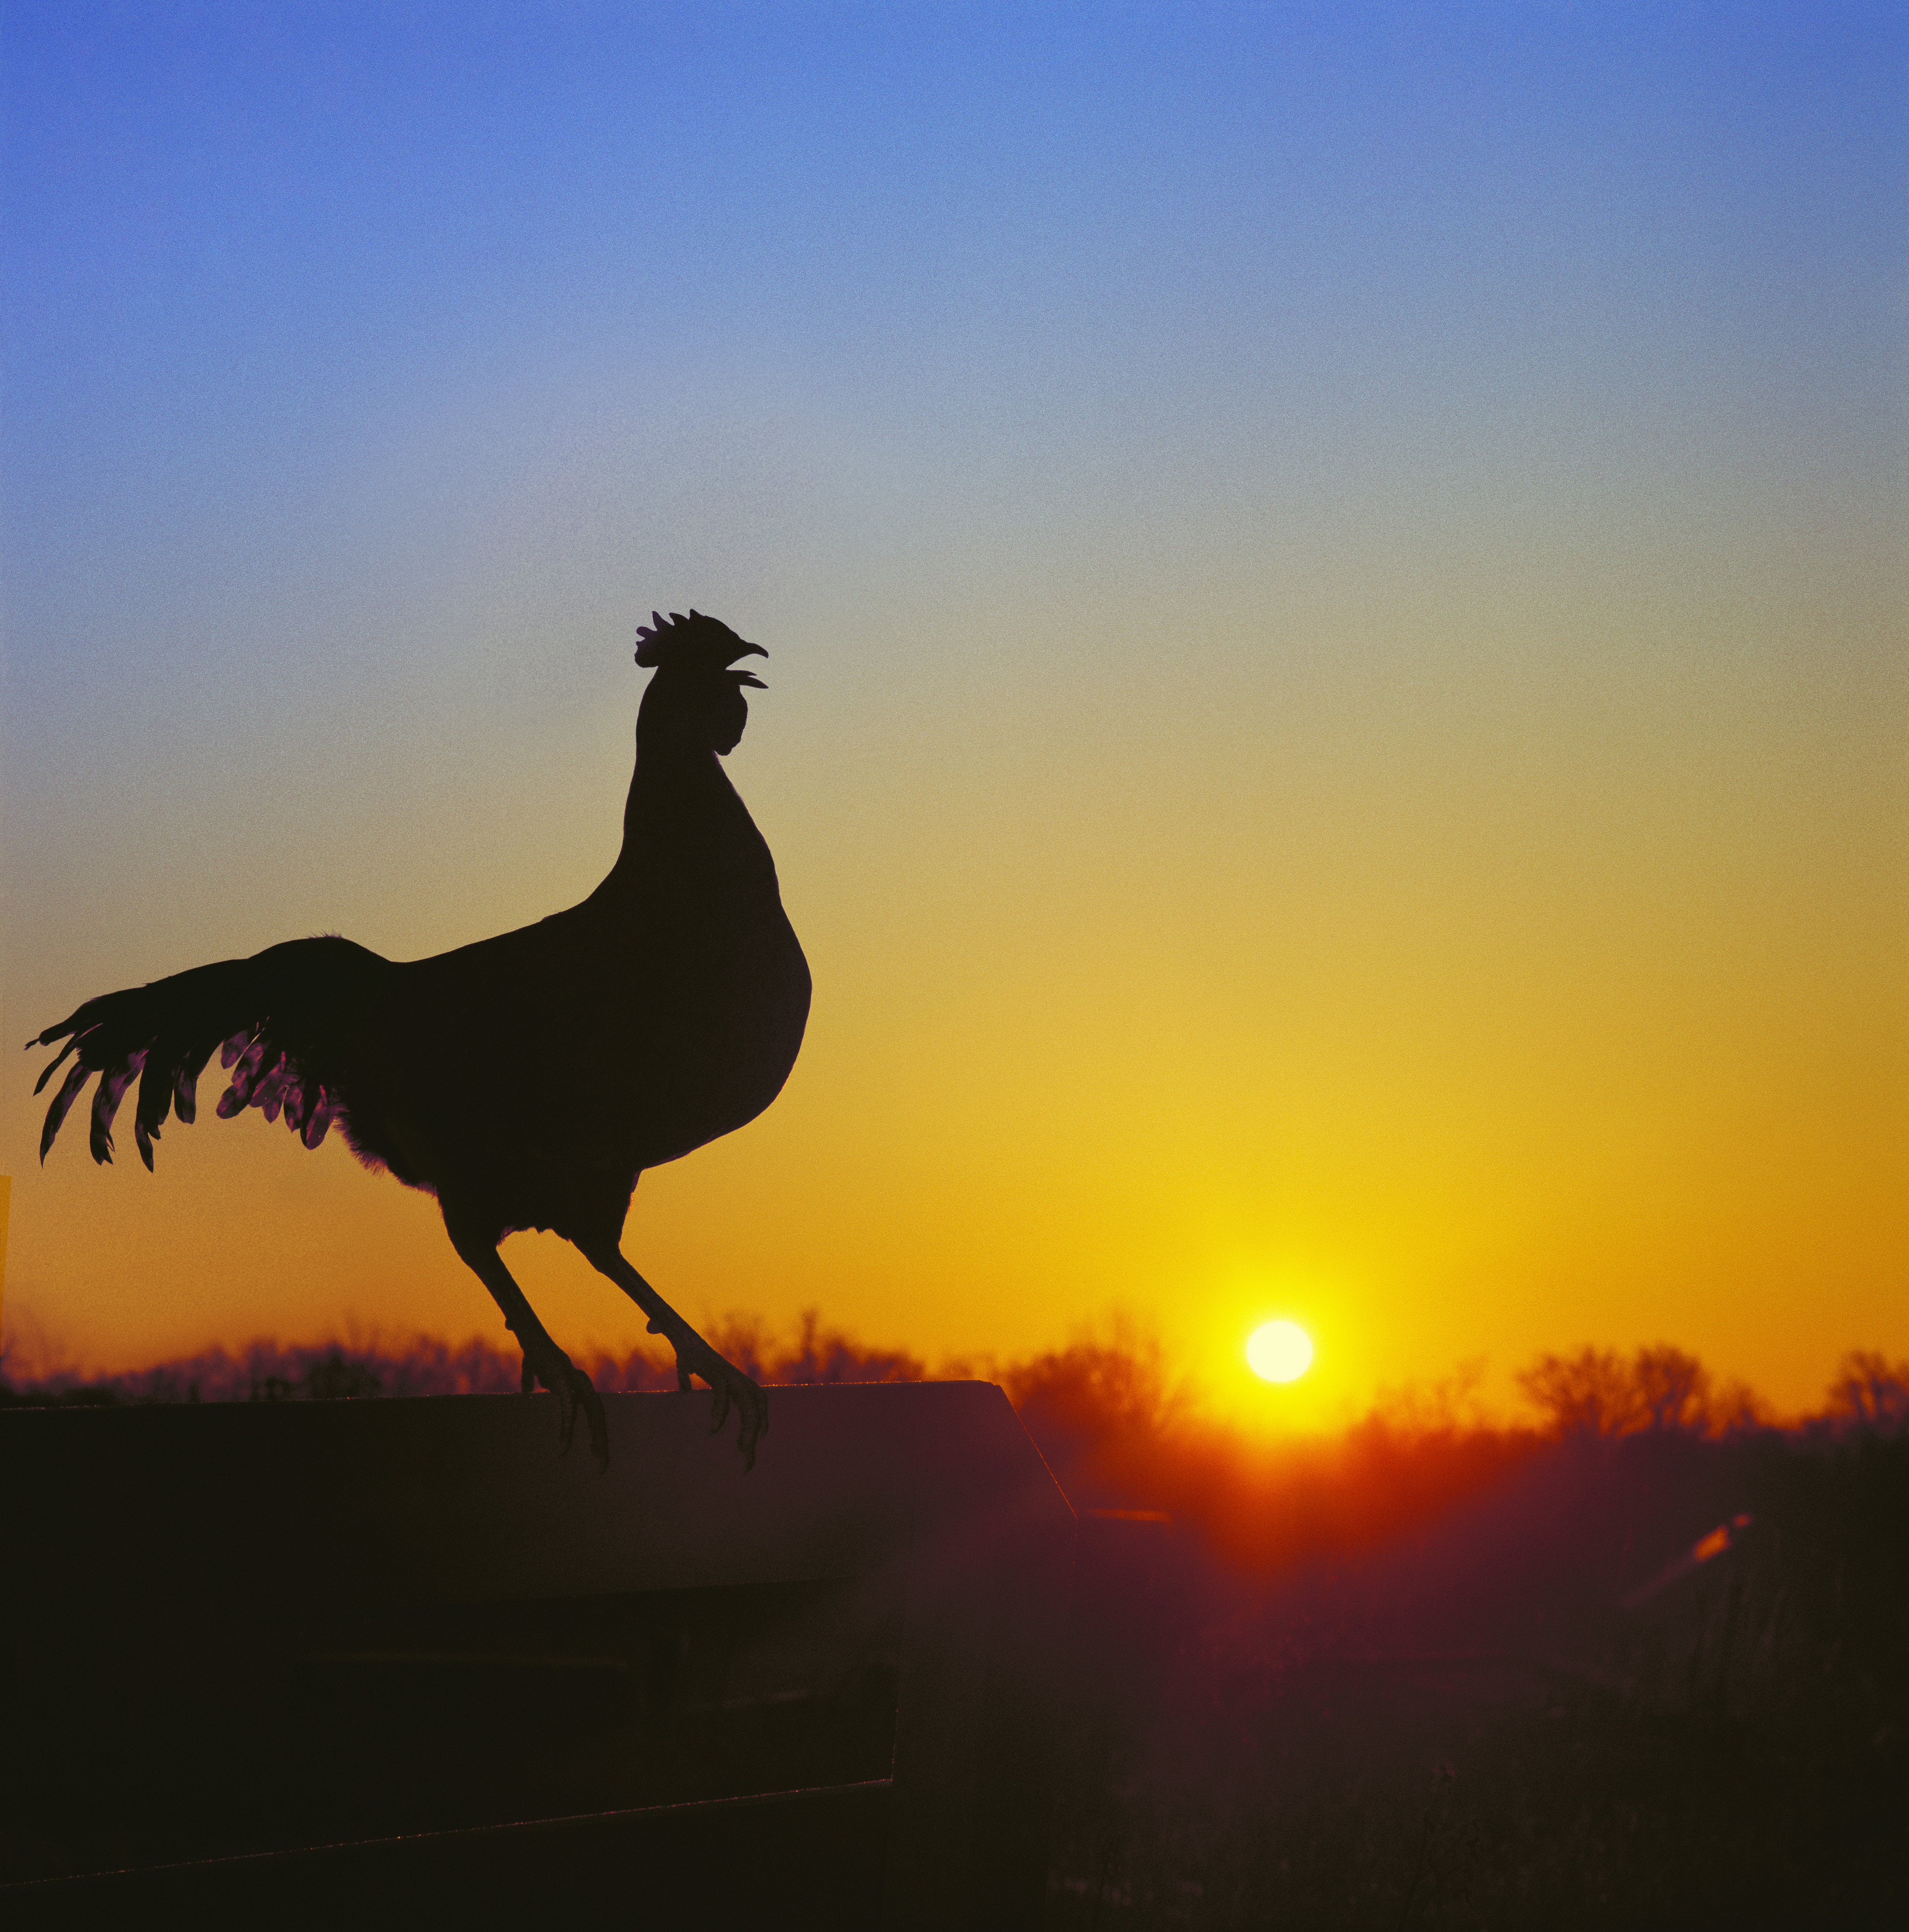 Rooster on fence at dawn, crowing